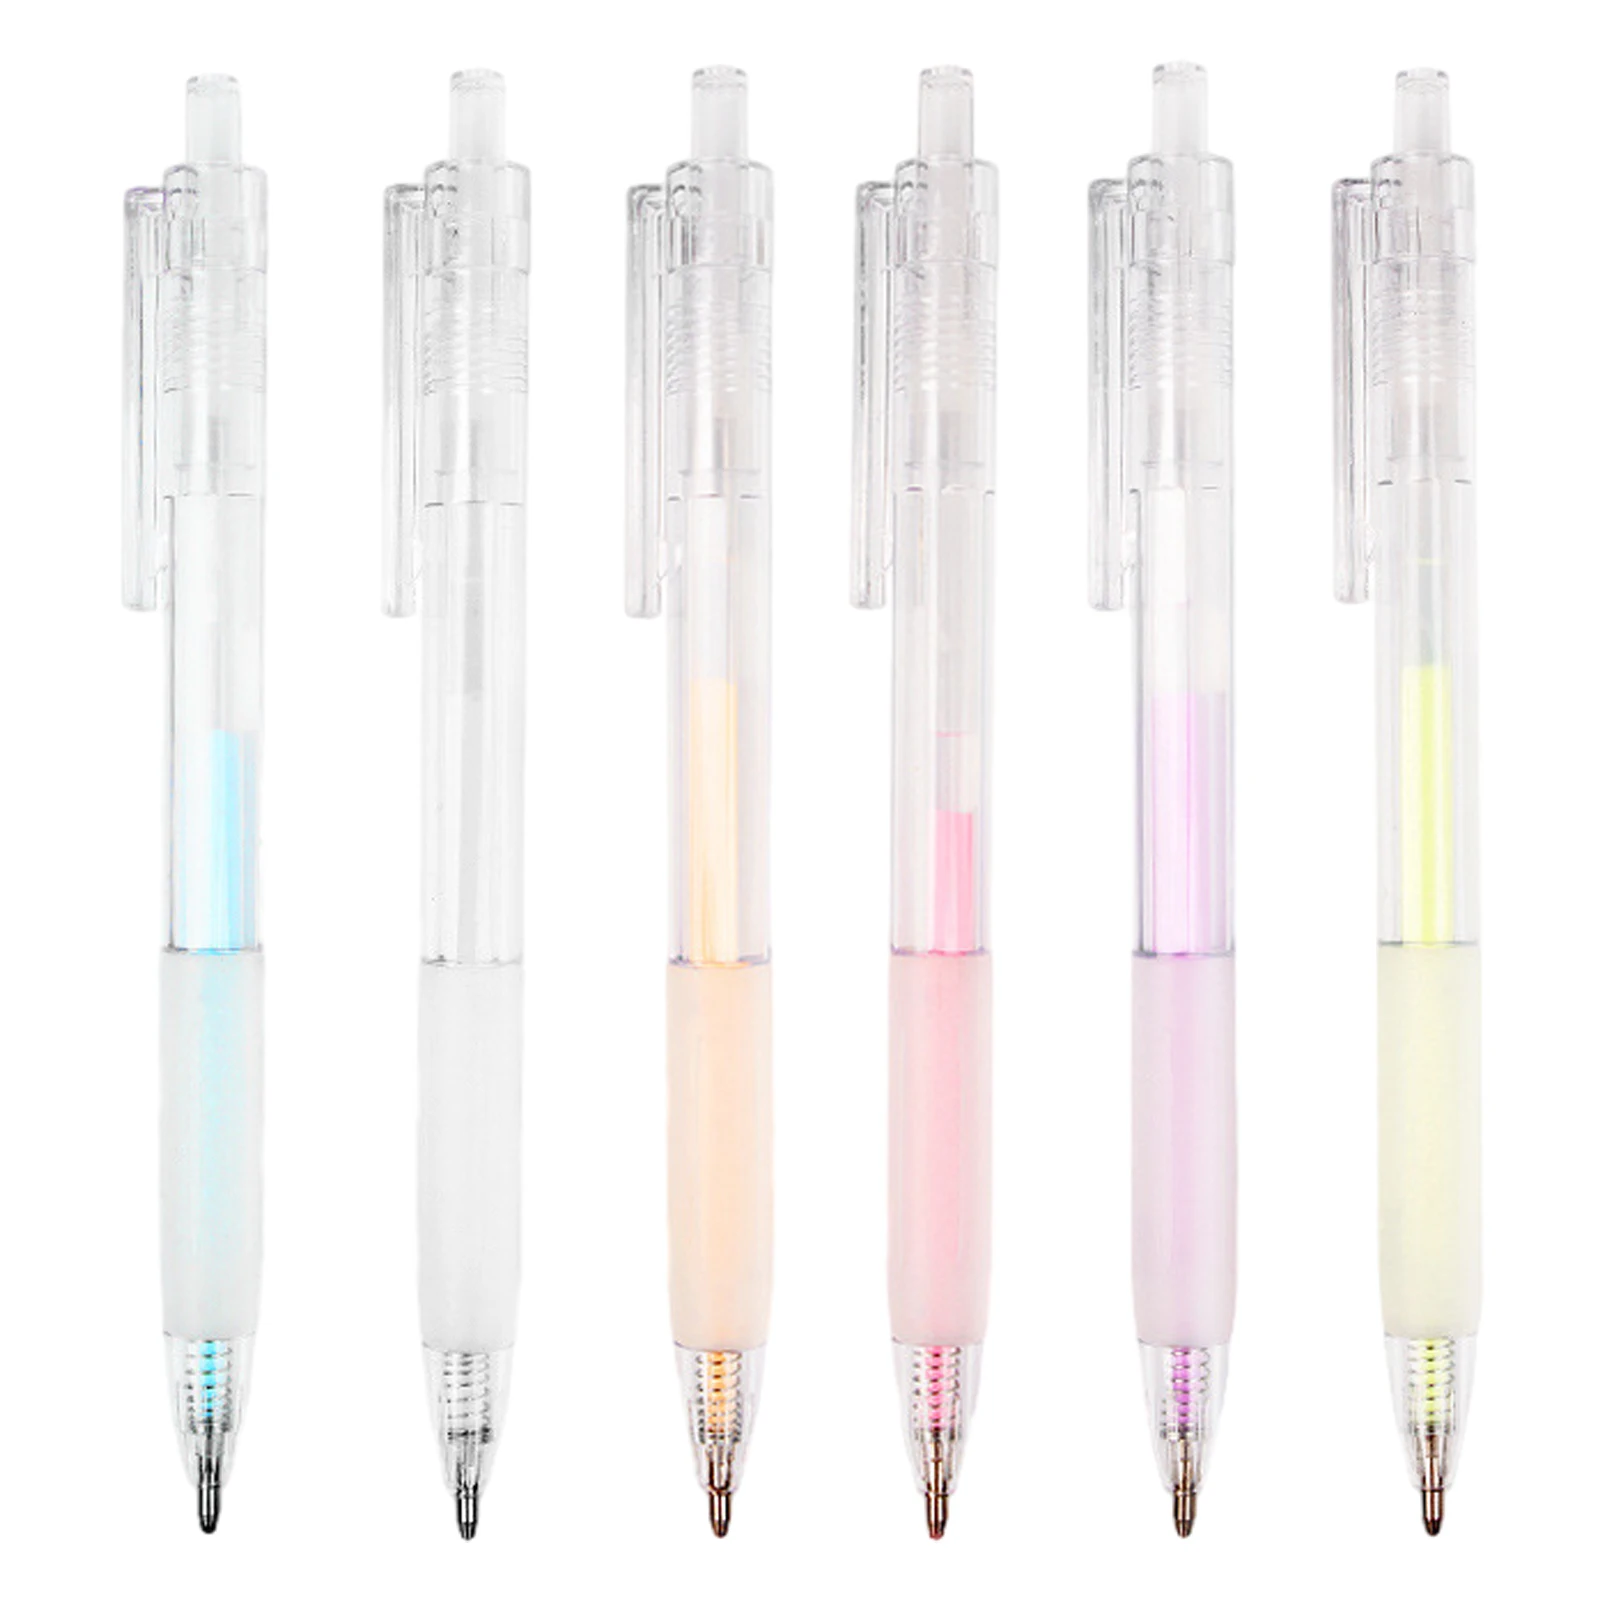 

6pcs Liquid DIY Precise Apply Quick Dry Easy Control Kids Friendly Card Making Glue Pen Family Crafting Like Writing Ball Point